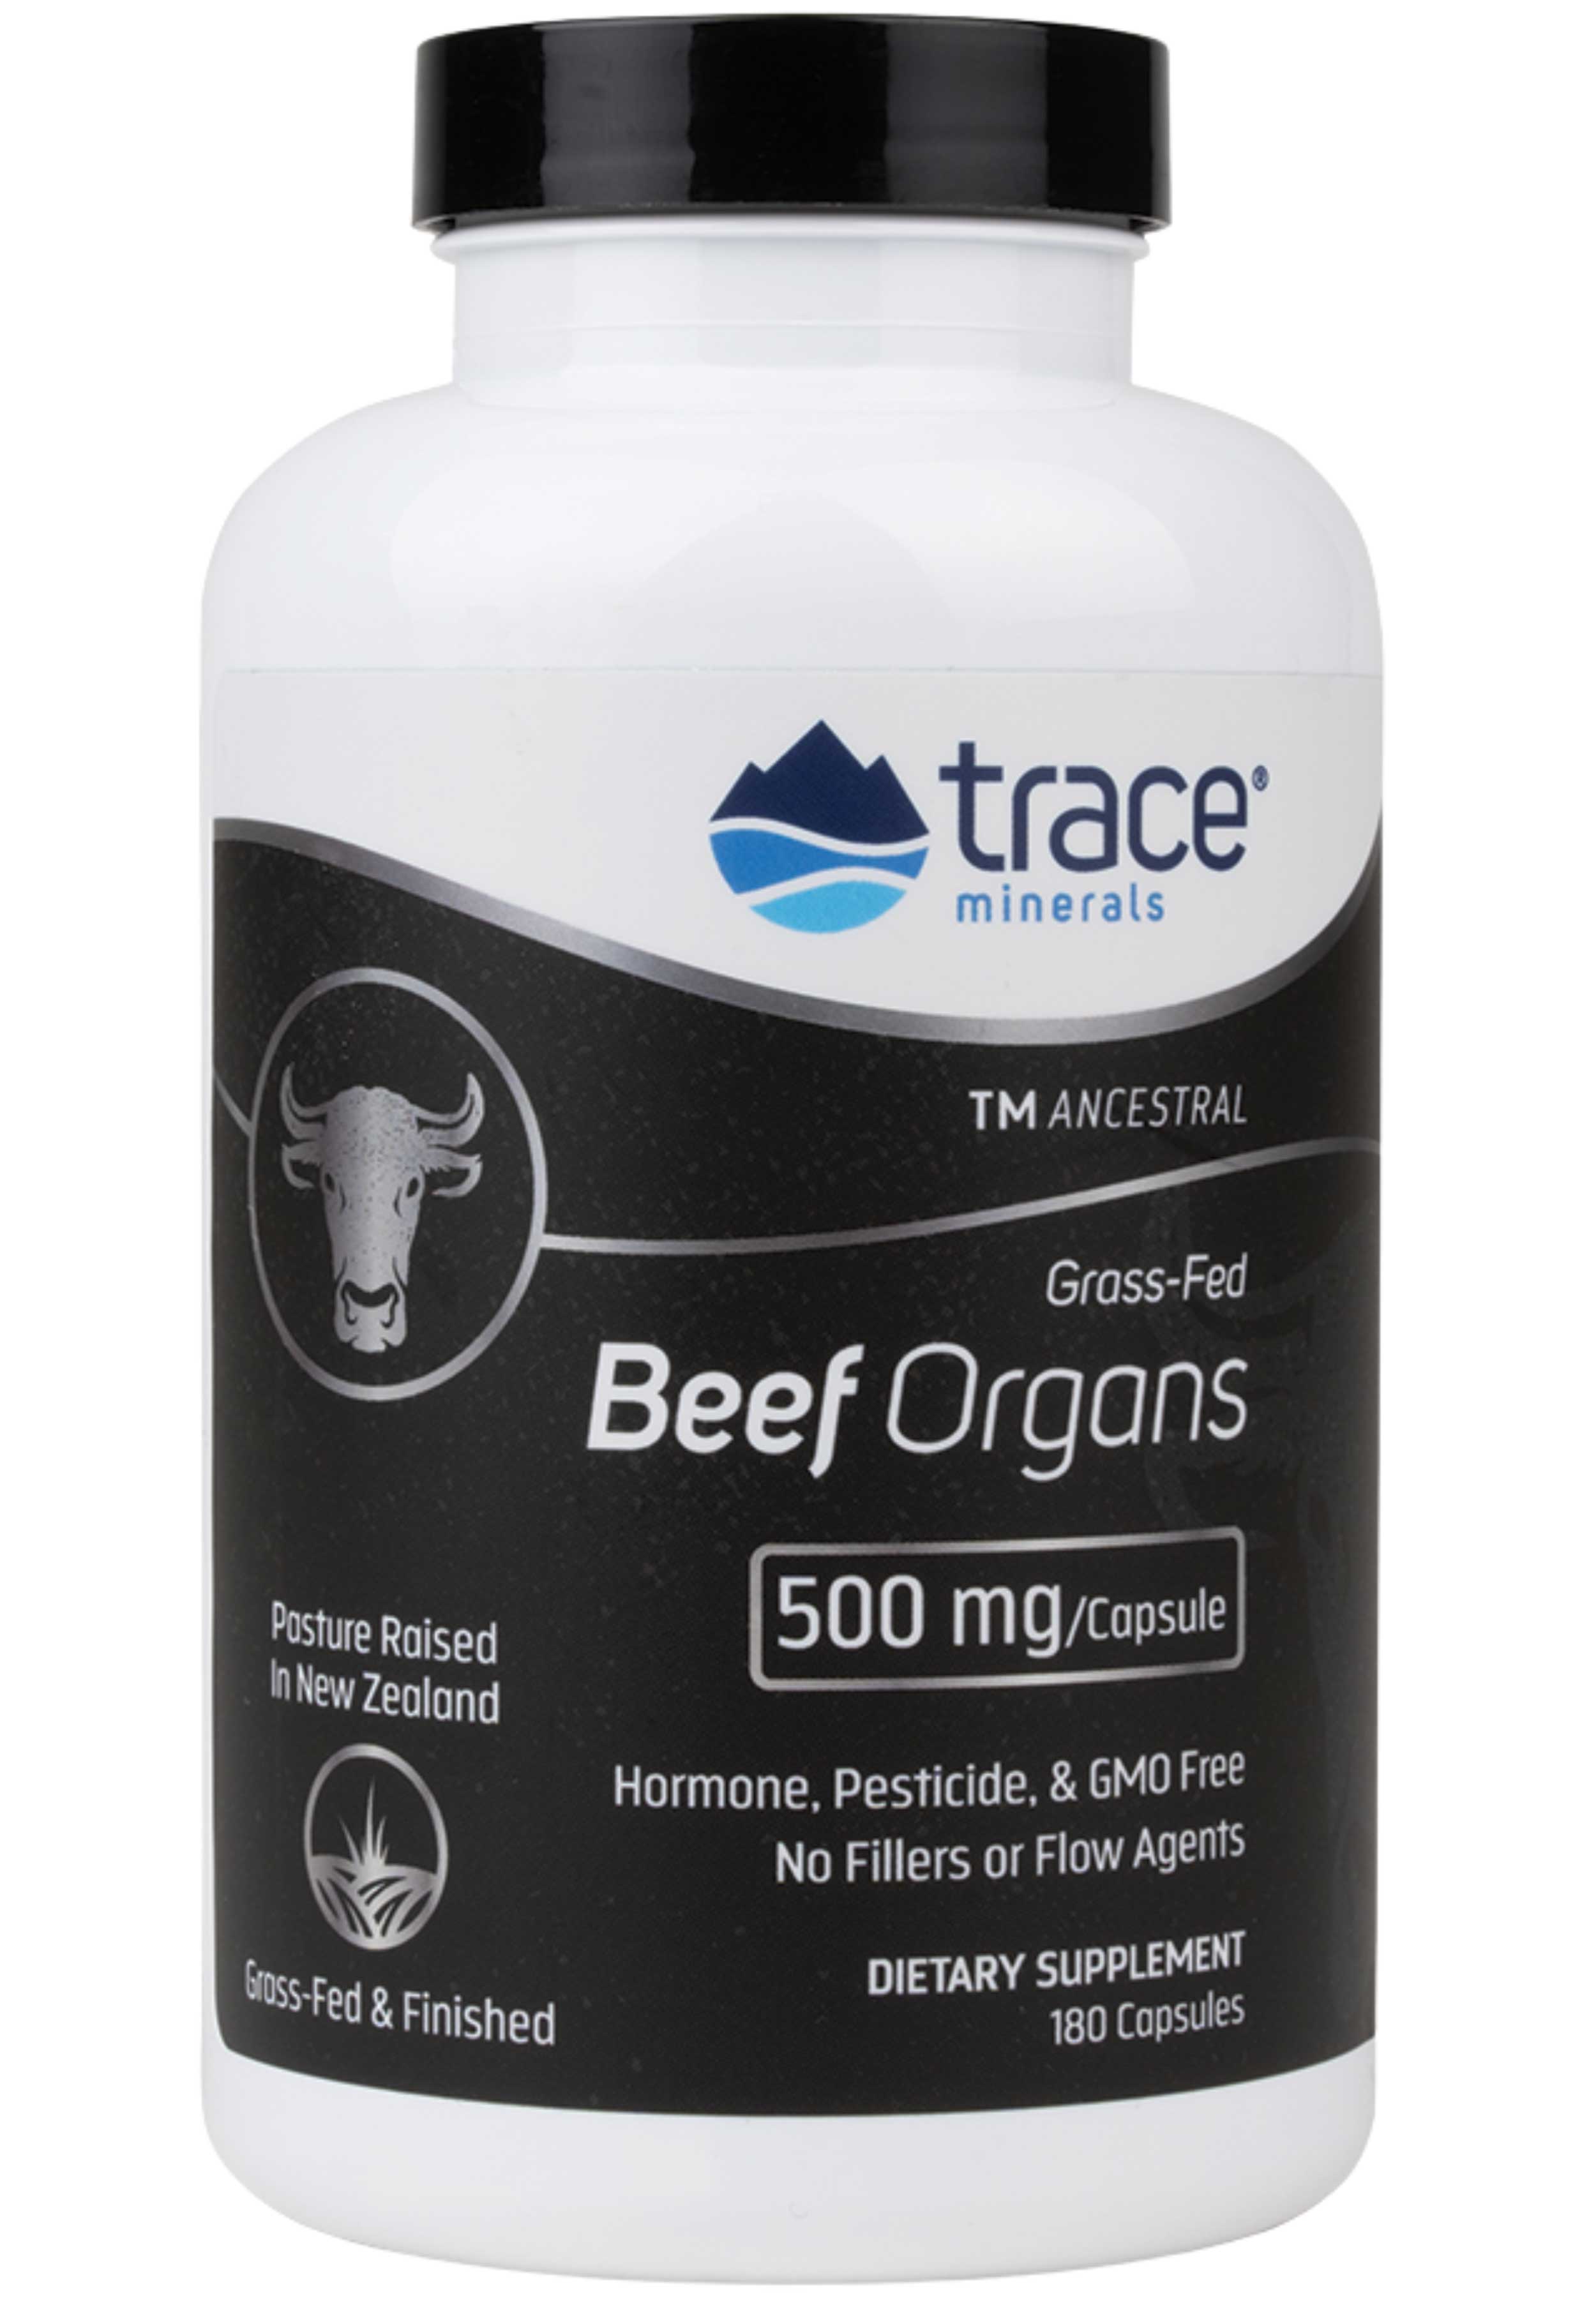 Trace Minerals Research TMAncestral Beef Organs Capsules